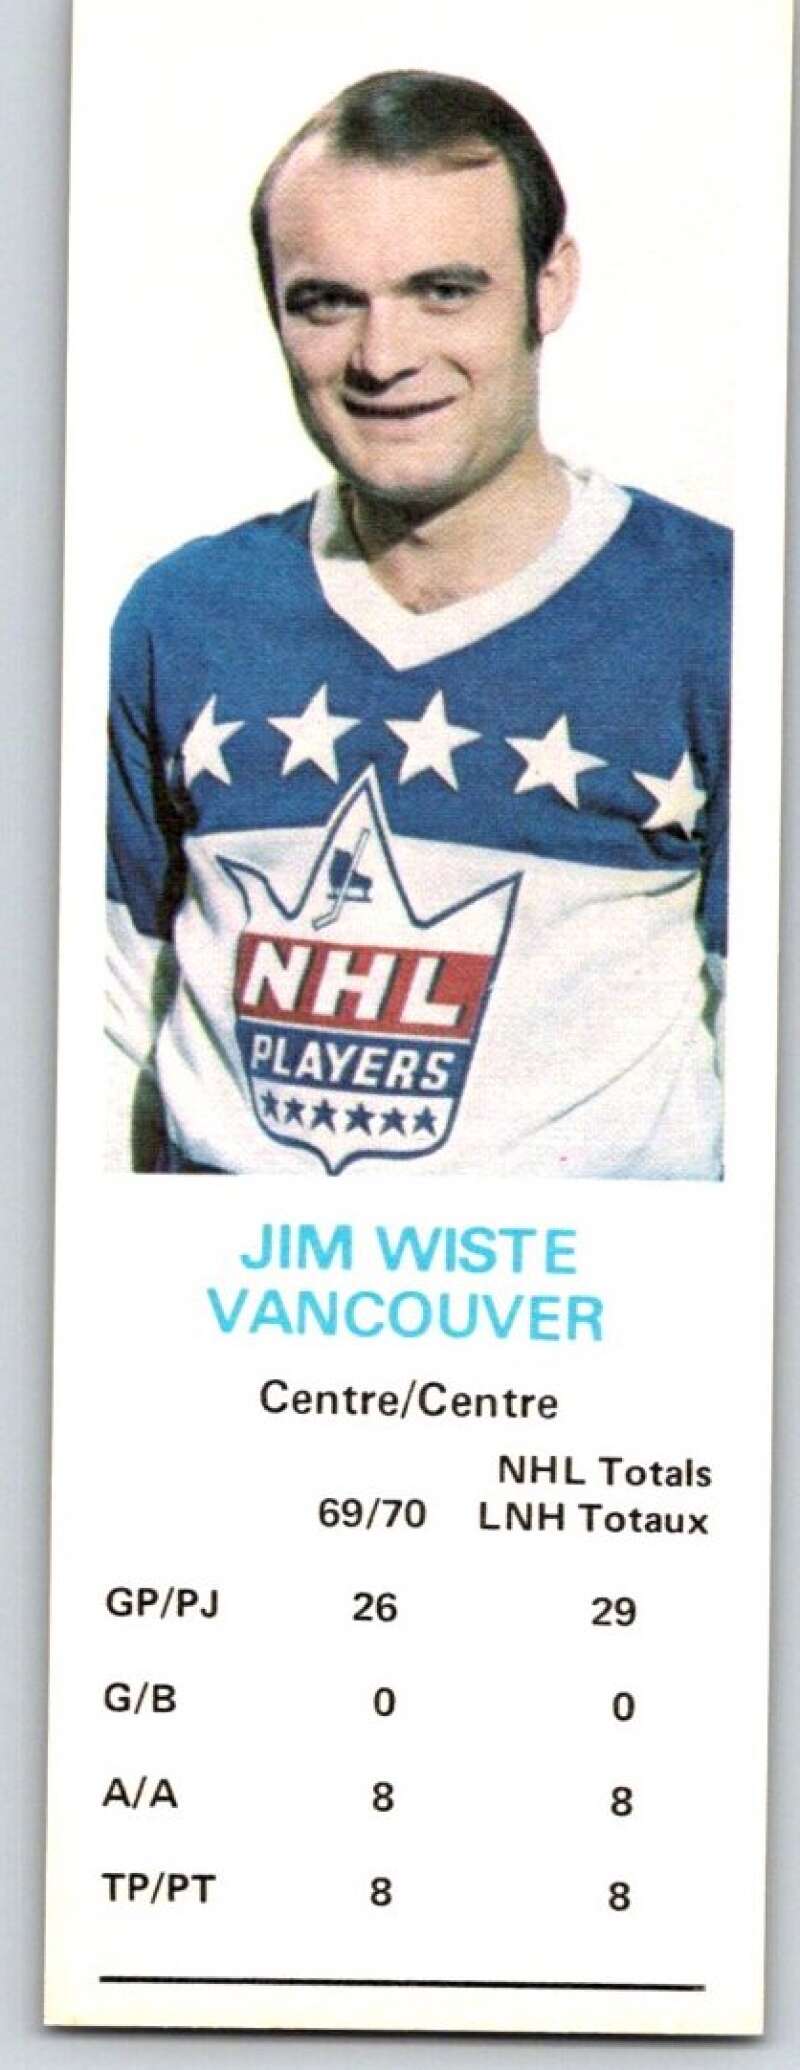 1970-71 Dad's Cookies #142 Jim Wiste  Vancouver Canucks  X434